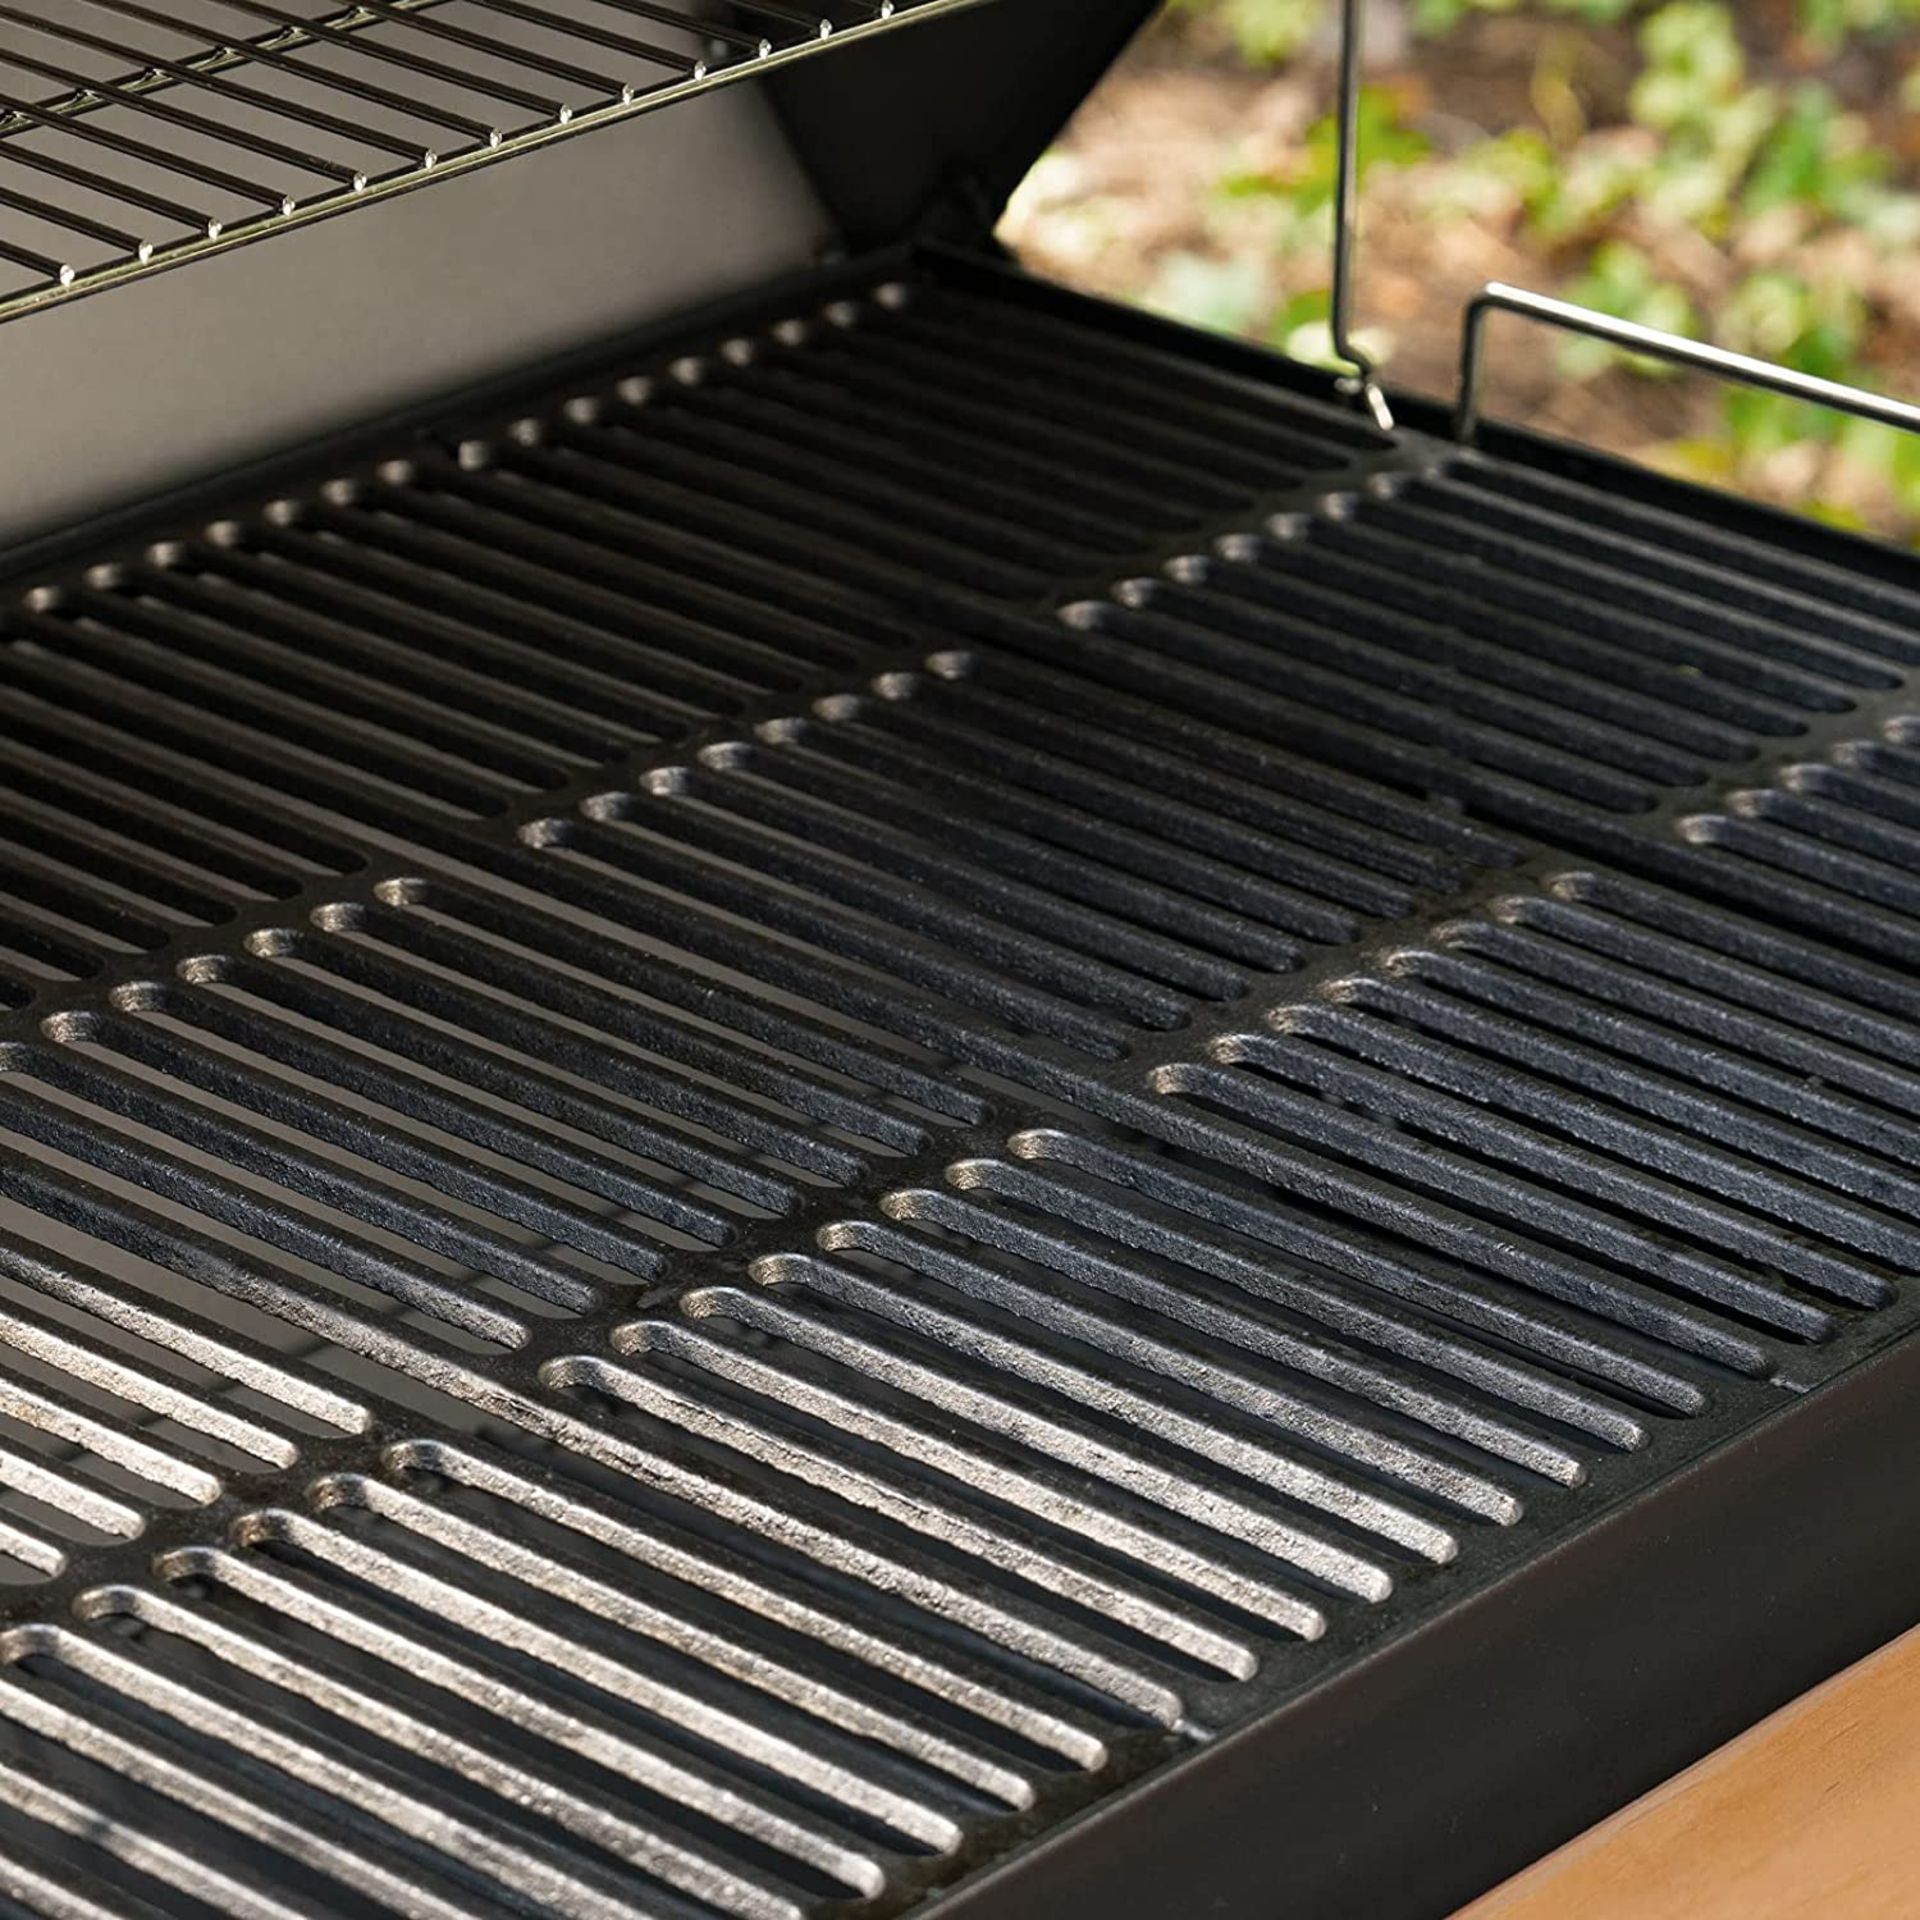 BRAND NEW CHAR GRILLER 2137 OUTLAW 1038 SQUARE INCH CHARCOAL GRILL/SMOKER - Image 5 of 12